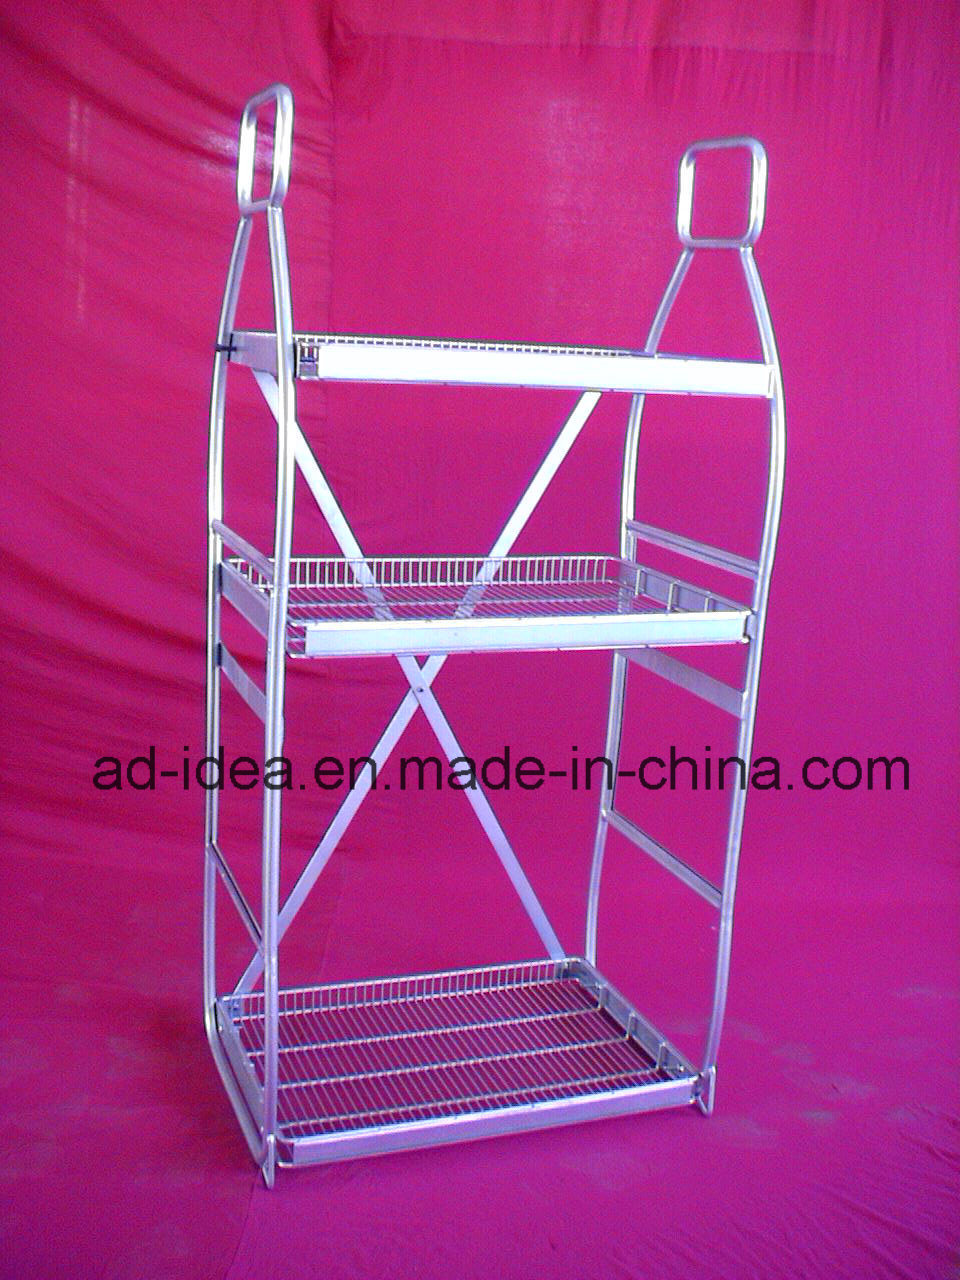 3 Layers Metal Shelf /Metal Display Stand/Metal Exhibition Stand (DR-02)